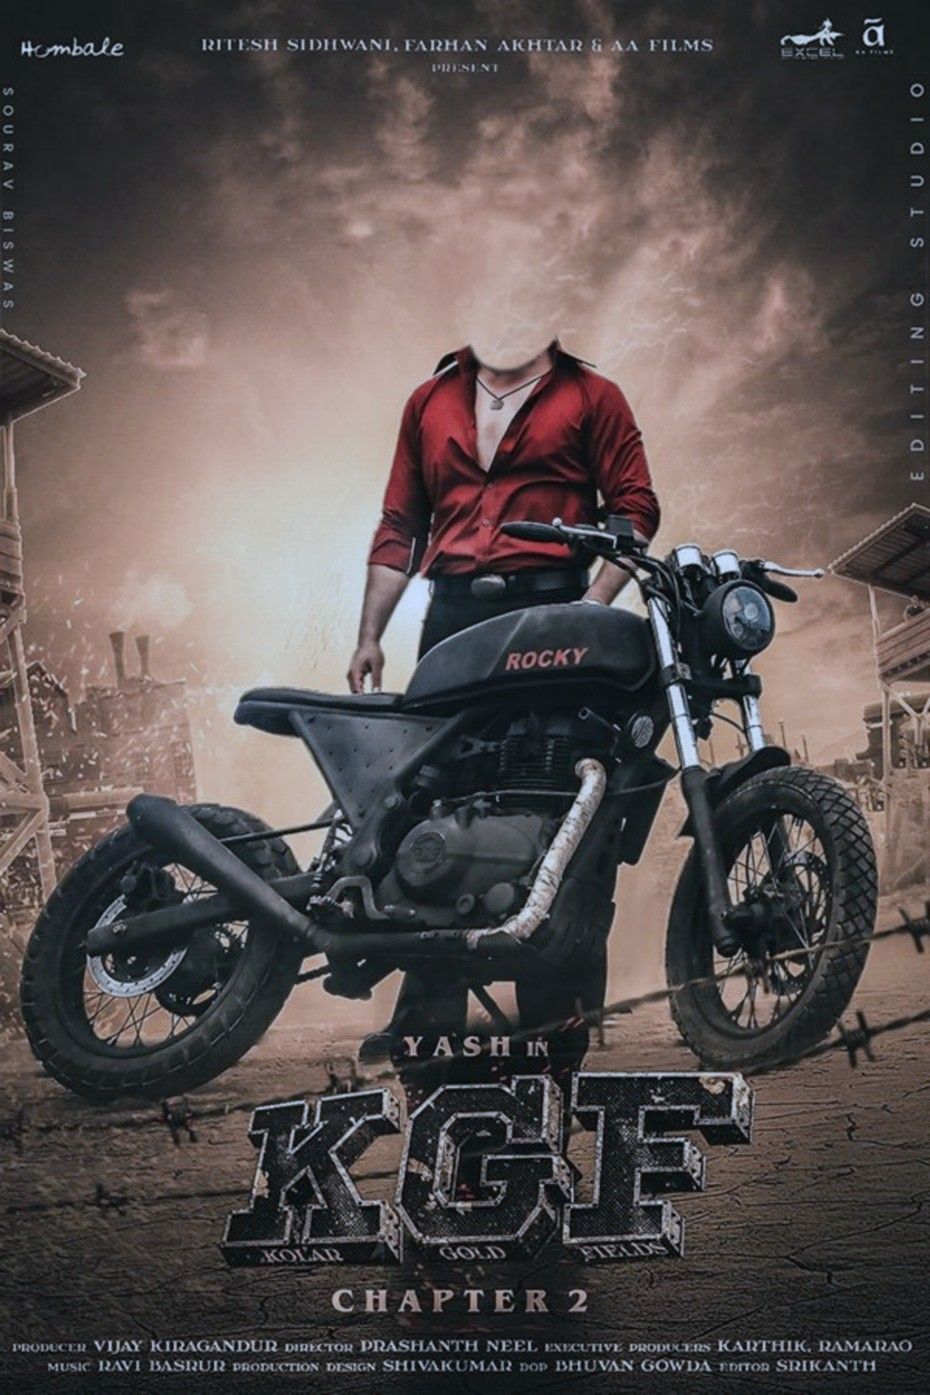 Kgf 2 editing background  Picsart kgf chapter 2 editing background  Kgf  background